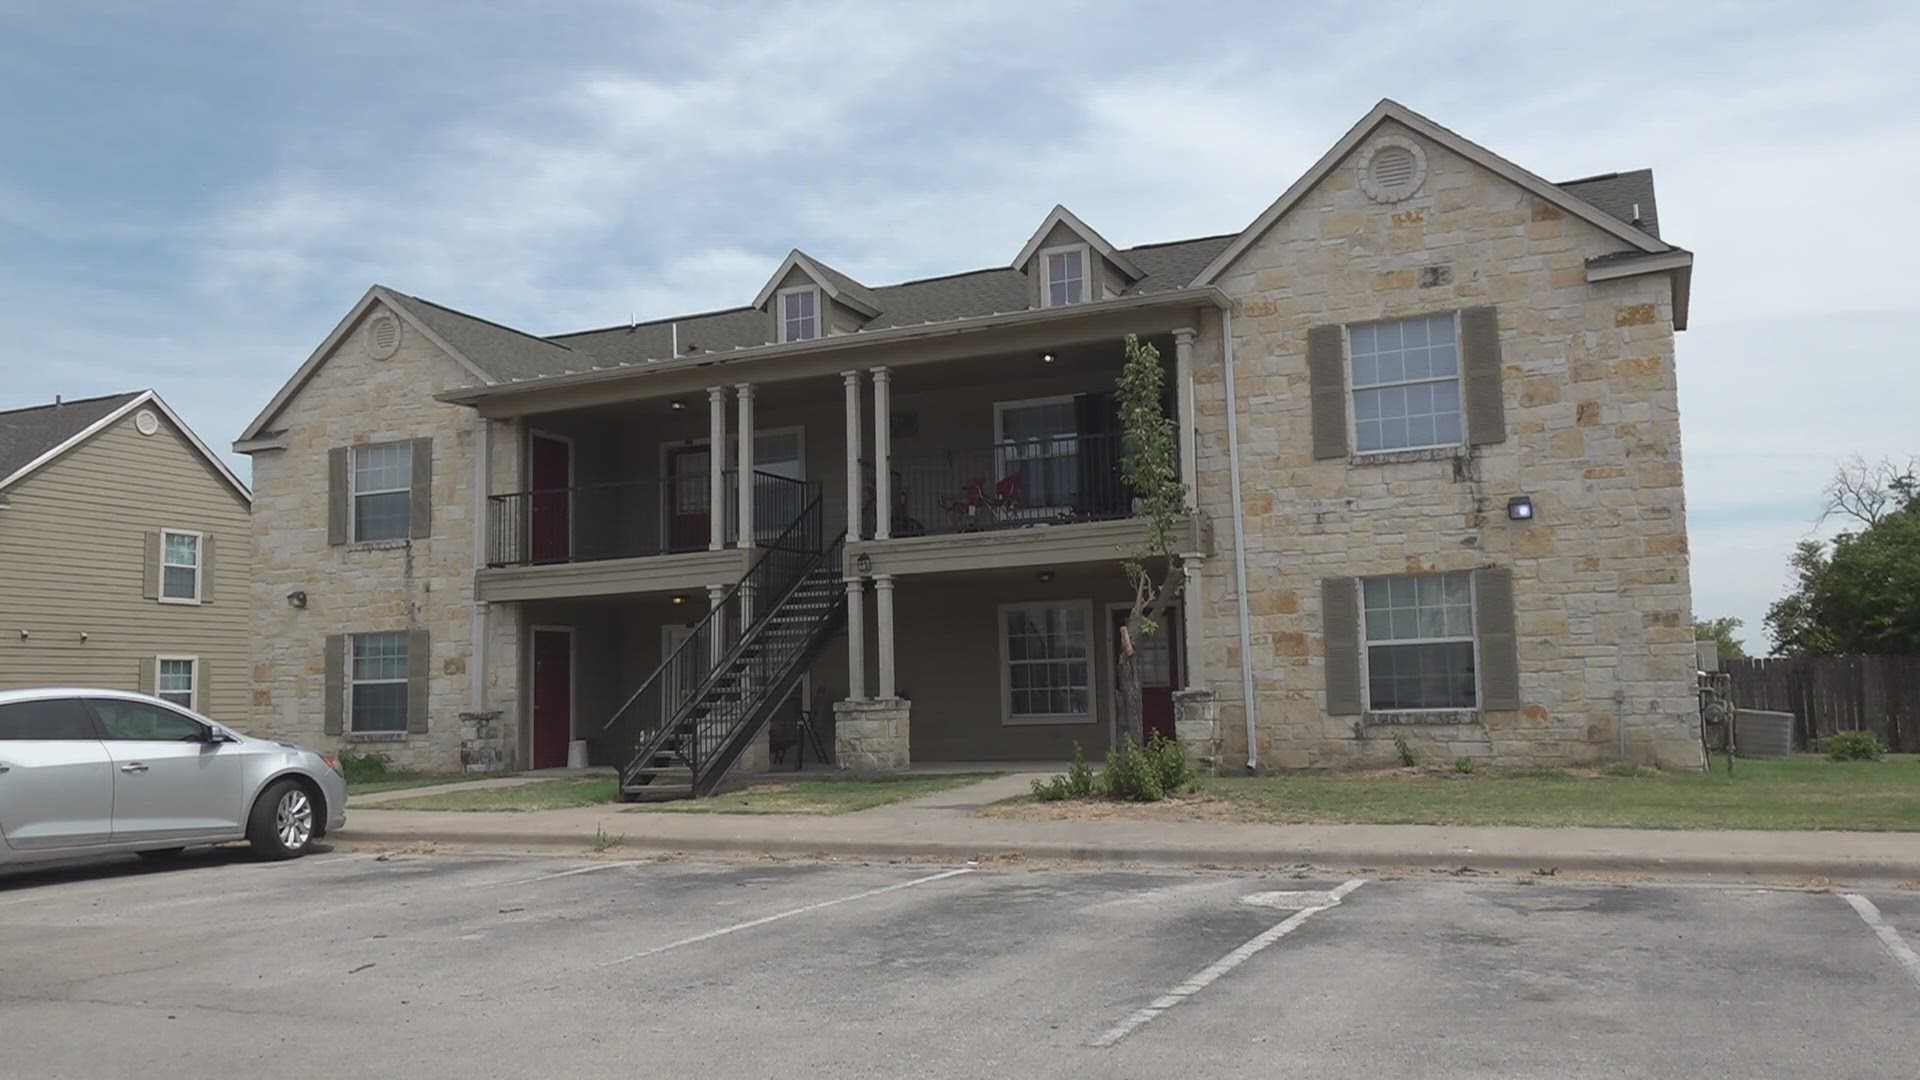 Tenants are still anxiously waiting to return to their homes after construction on the flood damages was mysteriously halted.